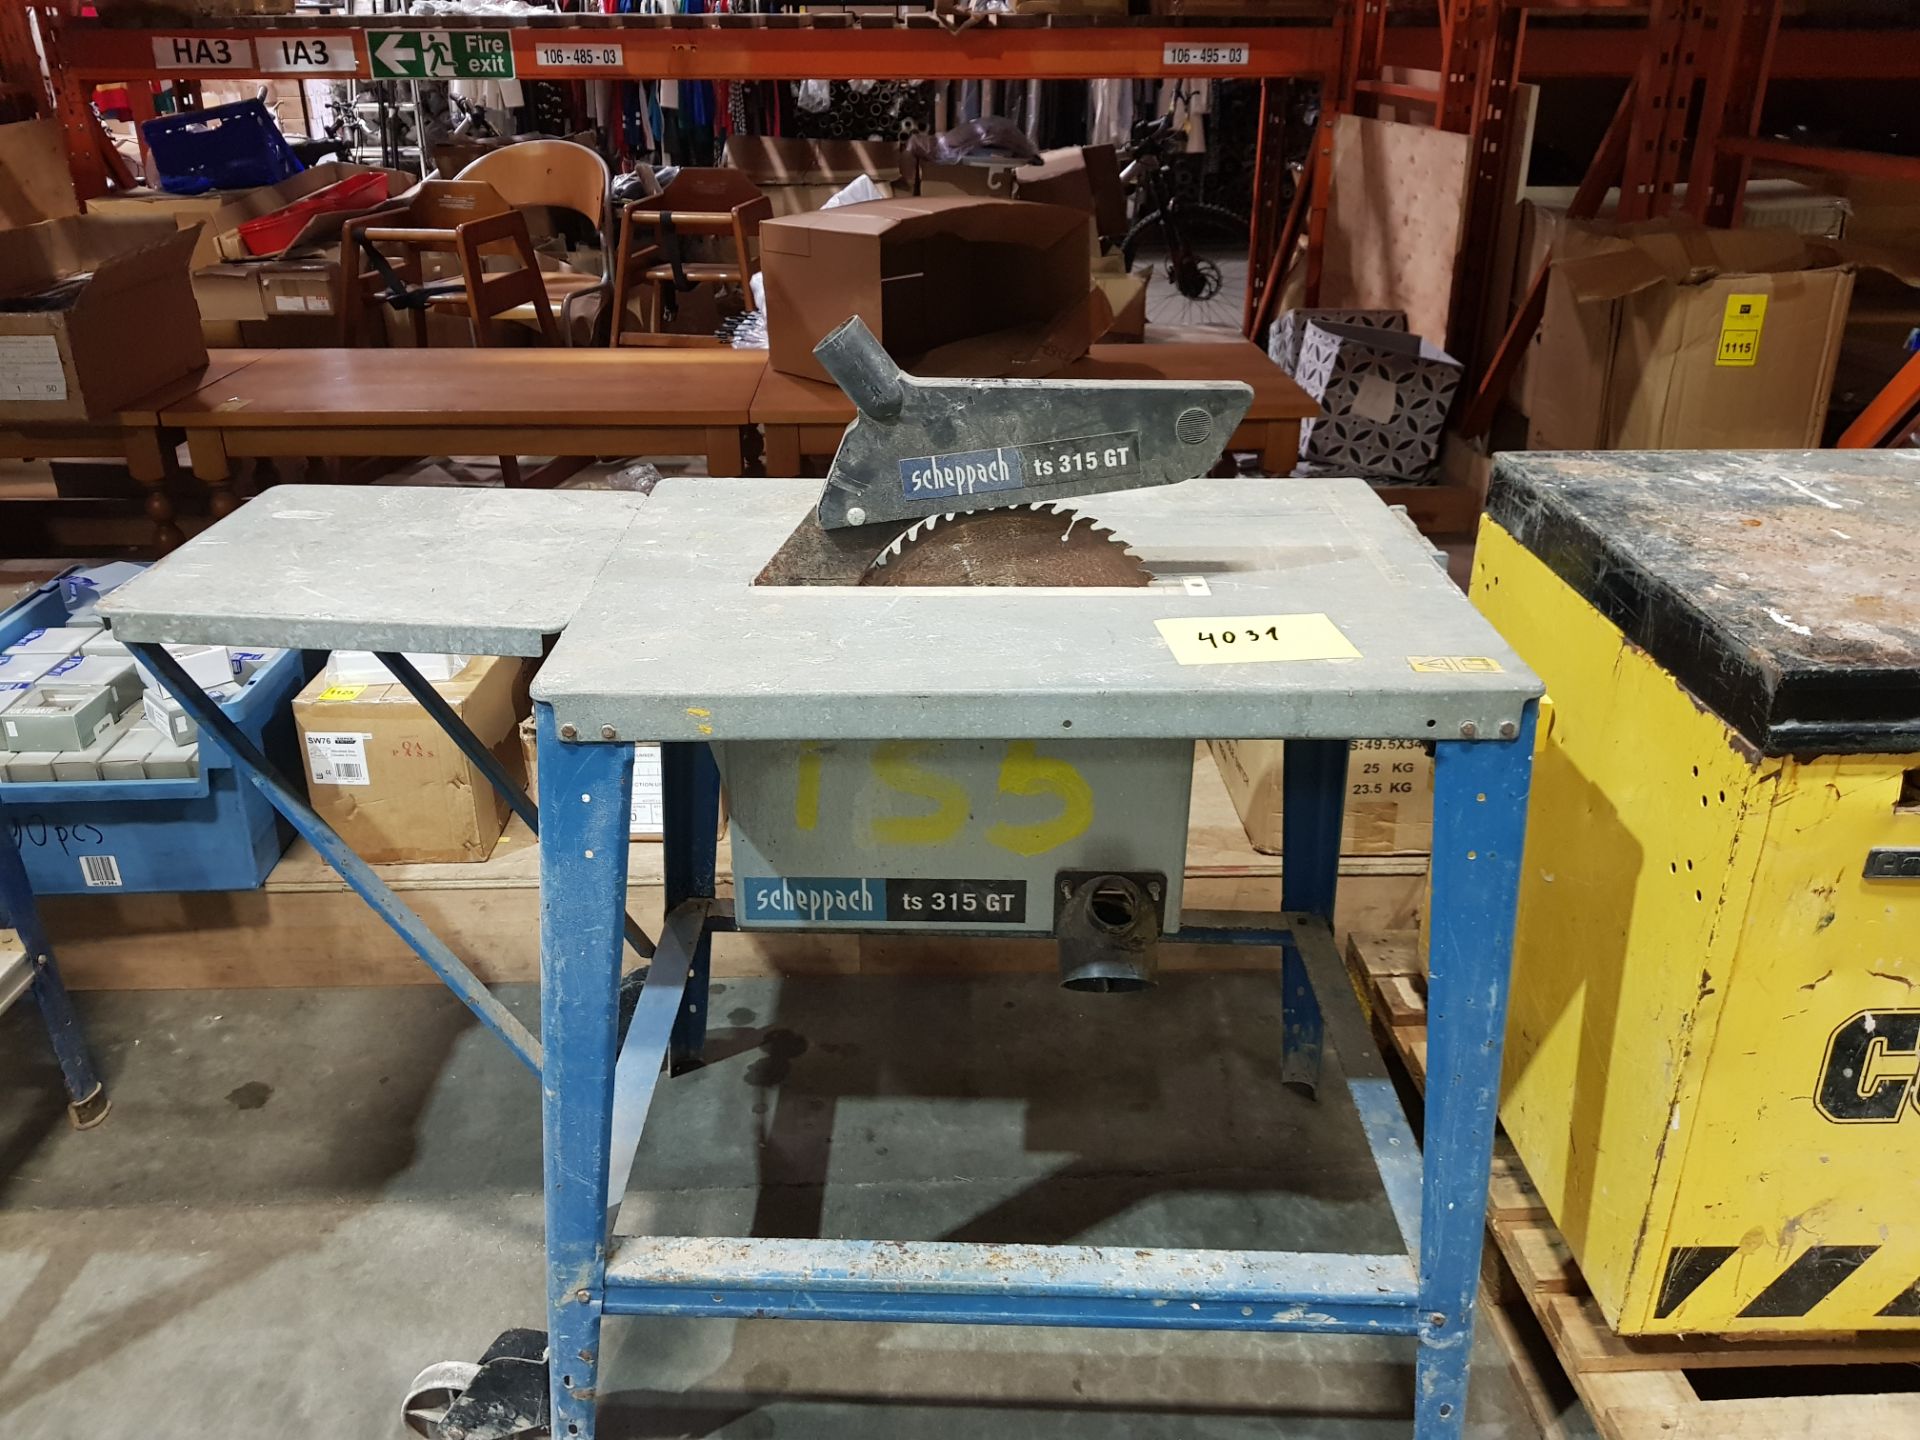 1 X INDUSTRIAL SCHEPPACH TISA 3.0 TABLE SAW - ON WHEELS - (01170 ) - NOT TESTED (110 V - 3 PIN